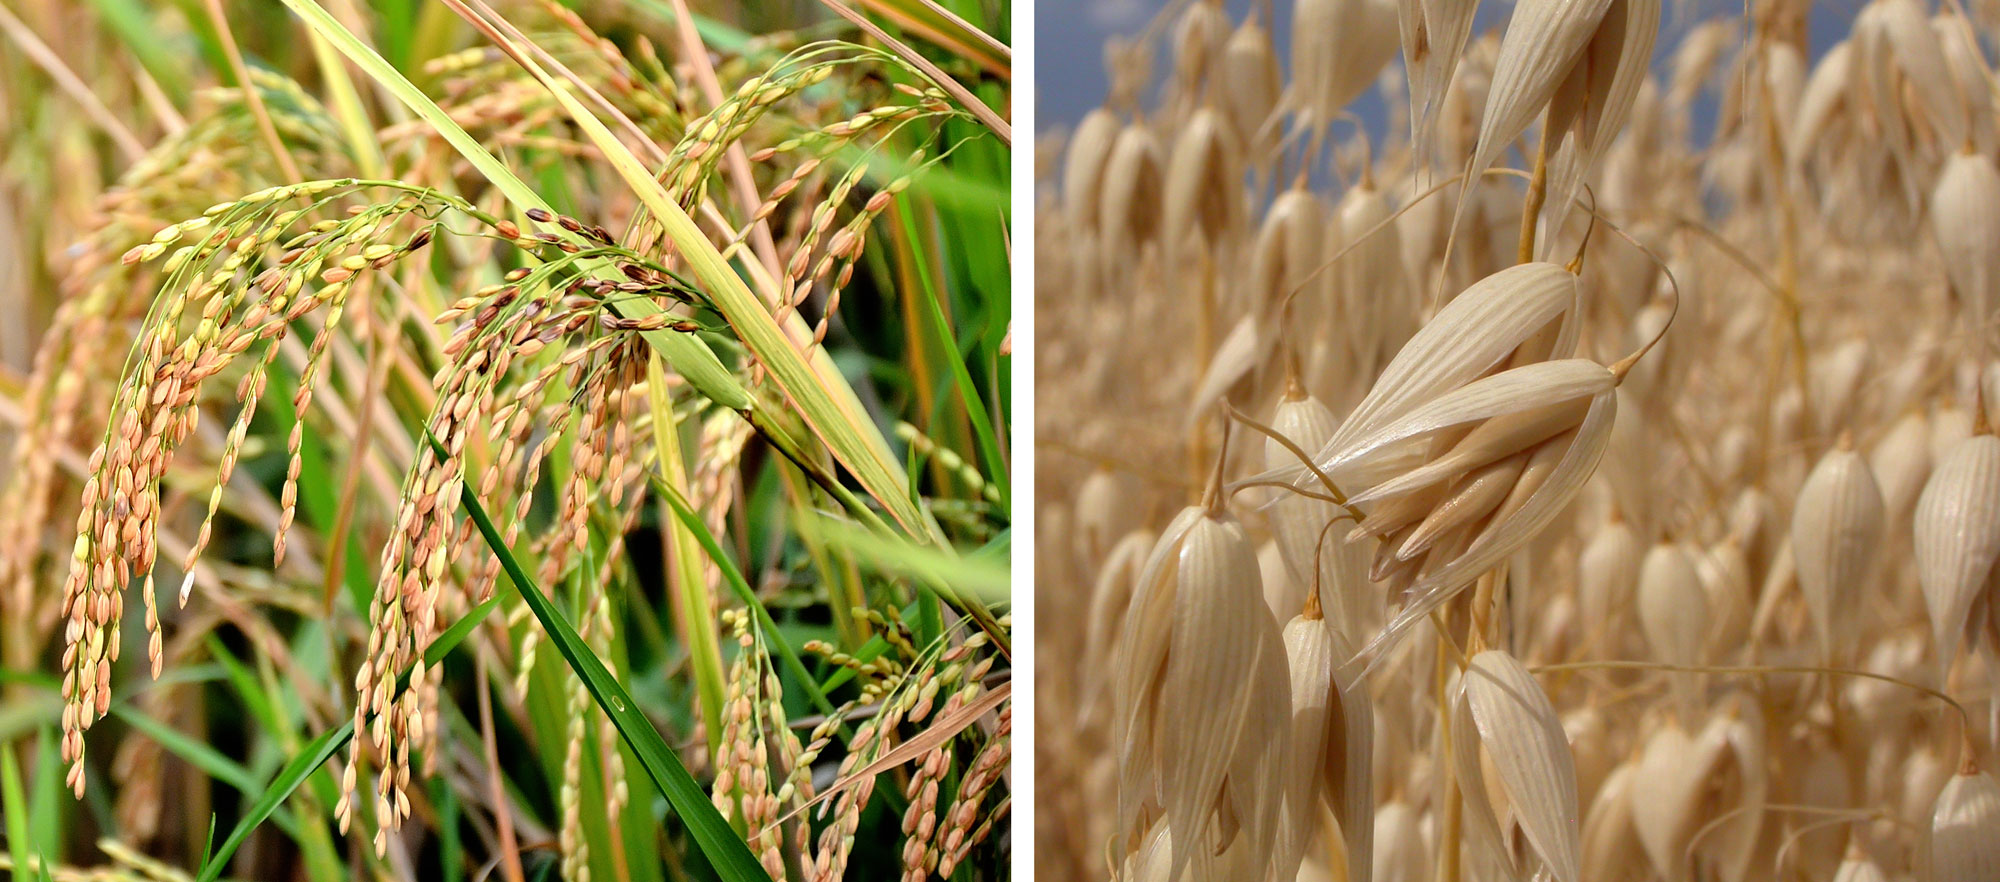 2-panel figure showing photos of cultivated grasses. Panel 1: Close up of rice plants showing nodding inflorescences bearing grain. Panel 2: Close up of oats showing beige spikelets.